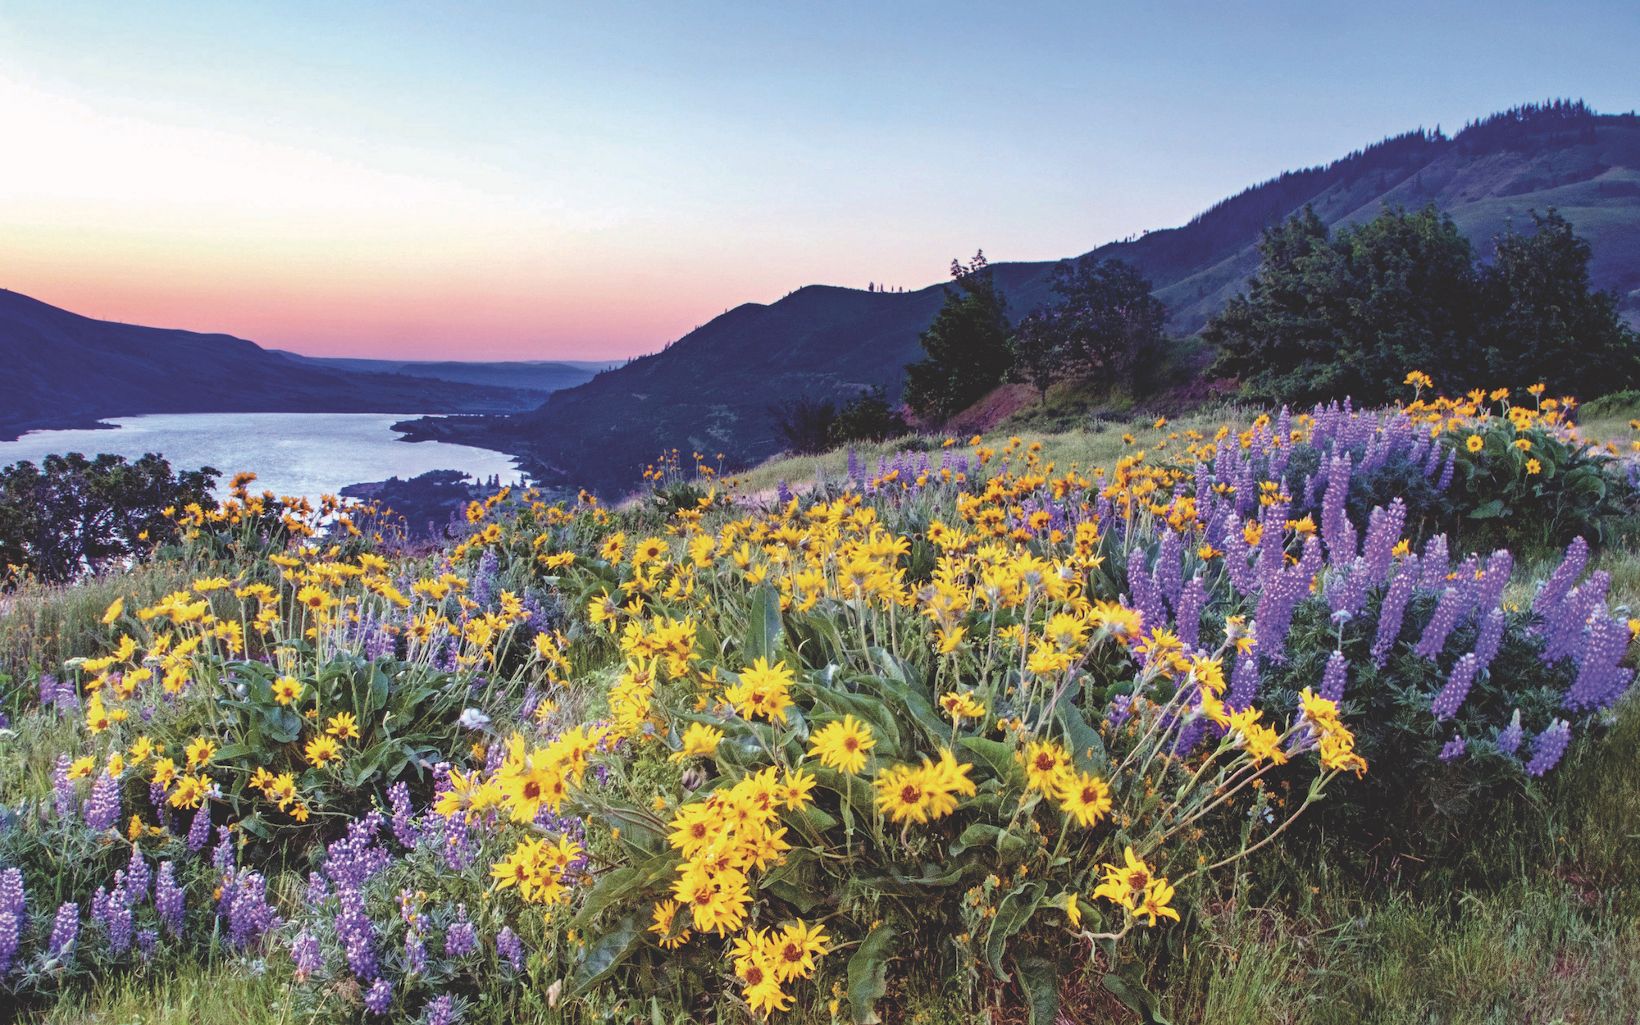 Columbia River Gorge Dawn Just before sunrise at Rowena Crest in Oregon's Columbia River Gorge. The location is filled with balsamroot, lupine and other wildflowers in mid-to-late spring. This is adjacent to Tom McCall Preserve, a Nature Conservancy protected area. © Gary Grossman/TNC Photo Contest 2019